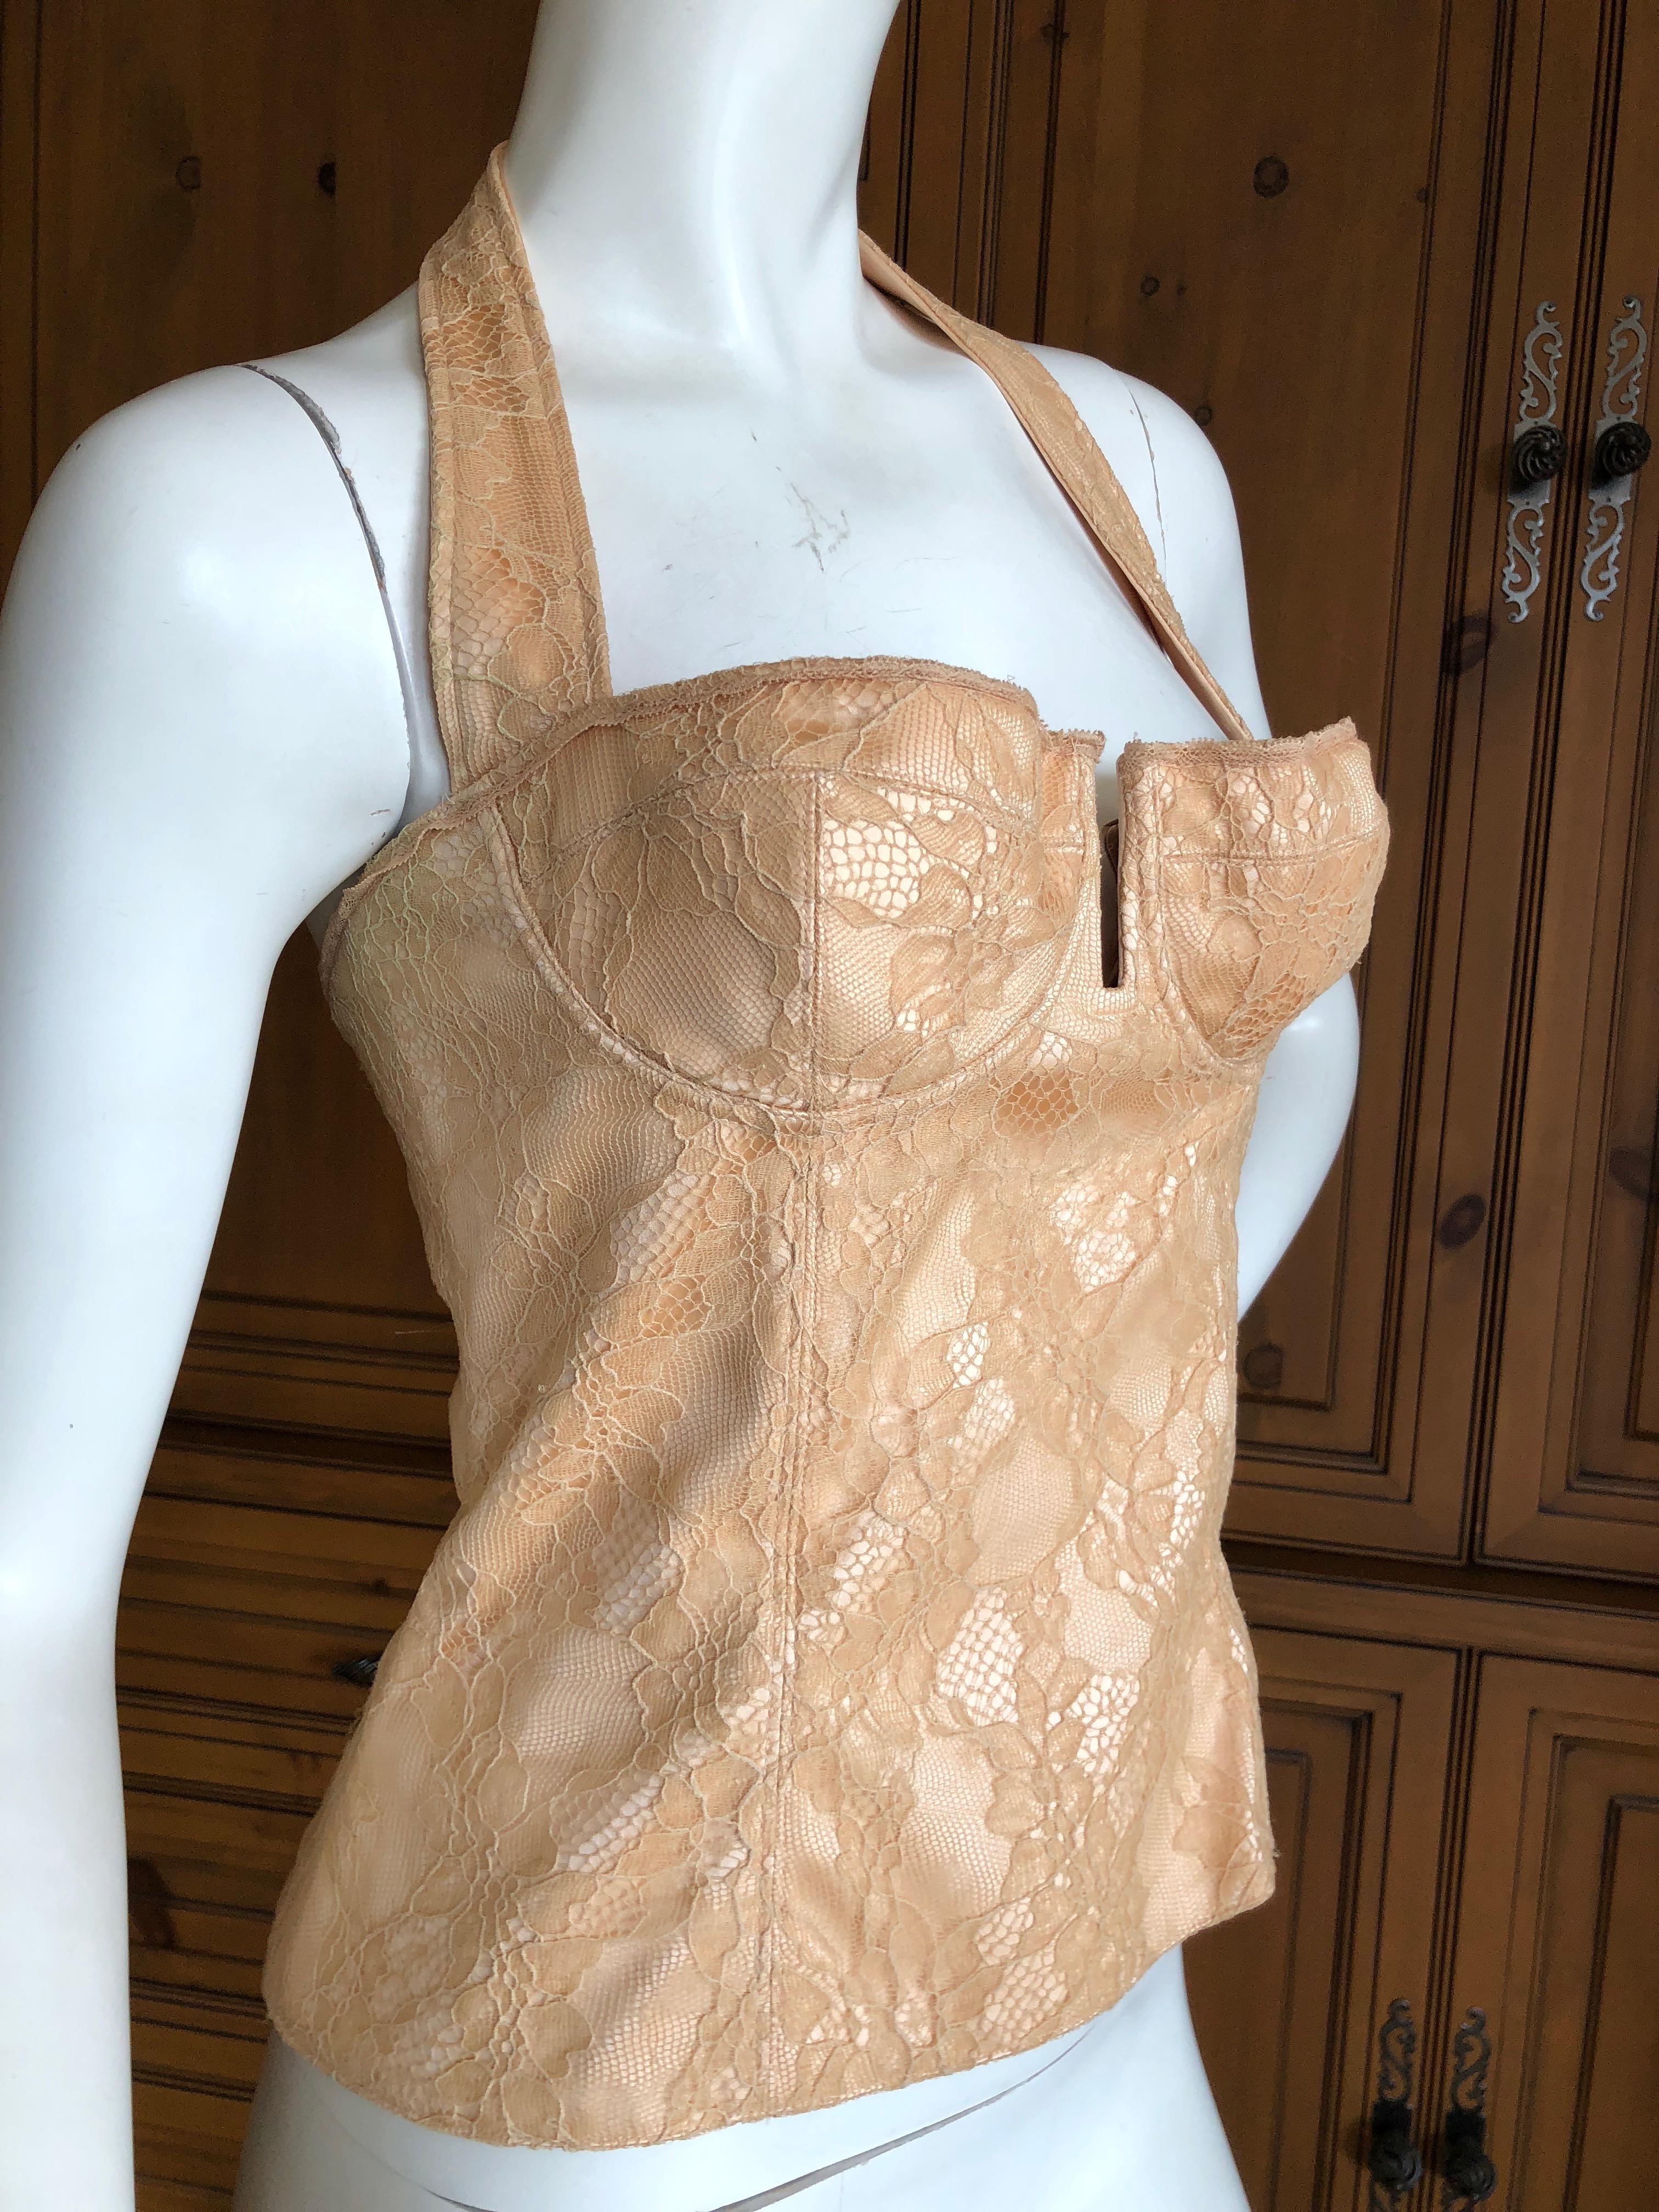 Christian Dior by John Galliano Vintage Gold Lace Overlay Corset   32B
Bust 30